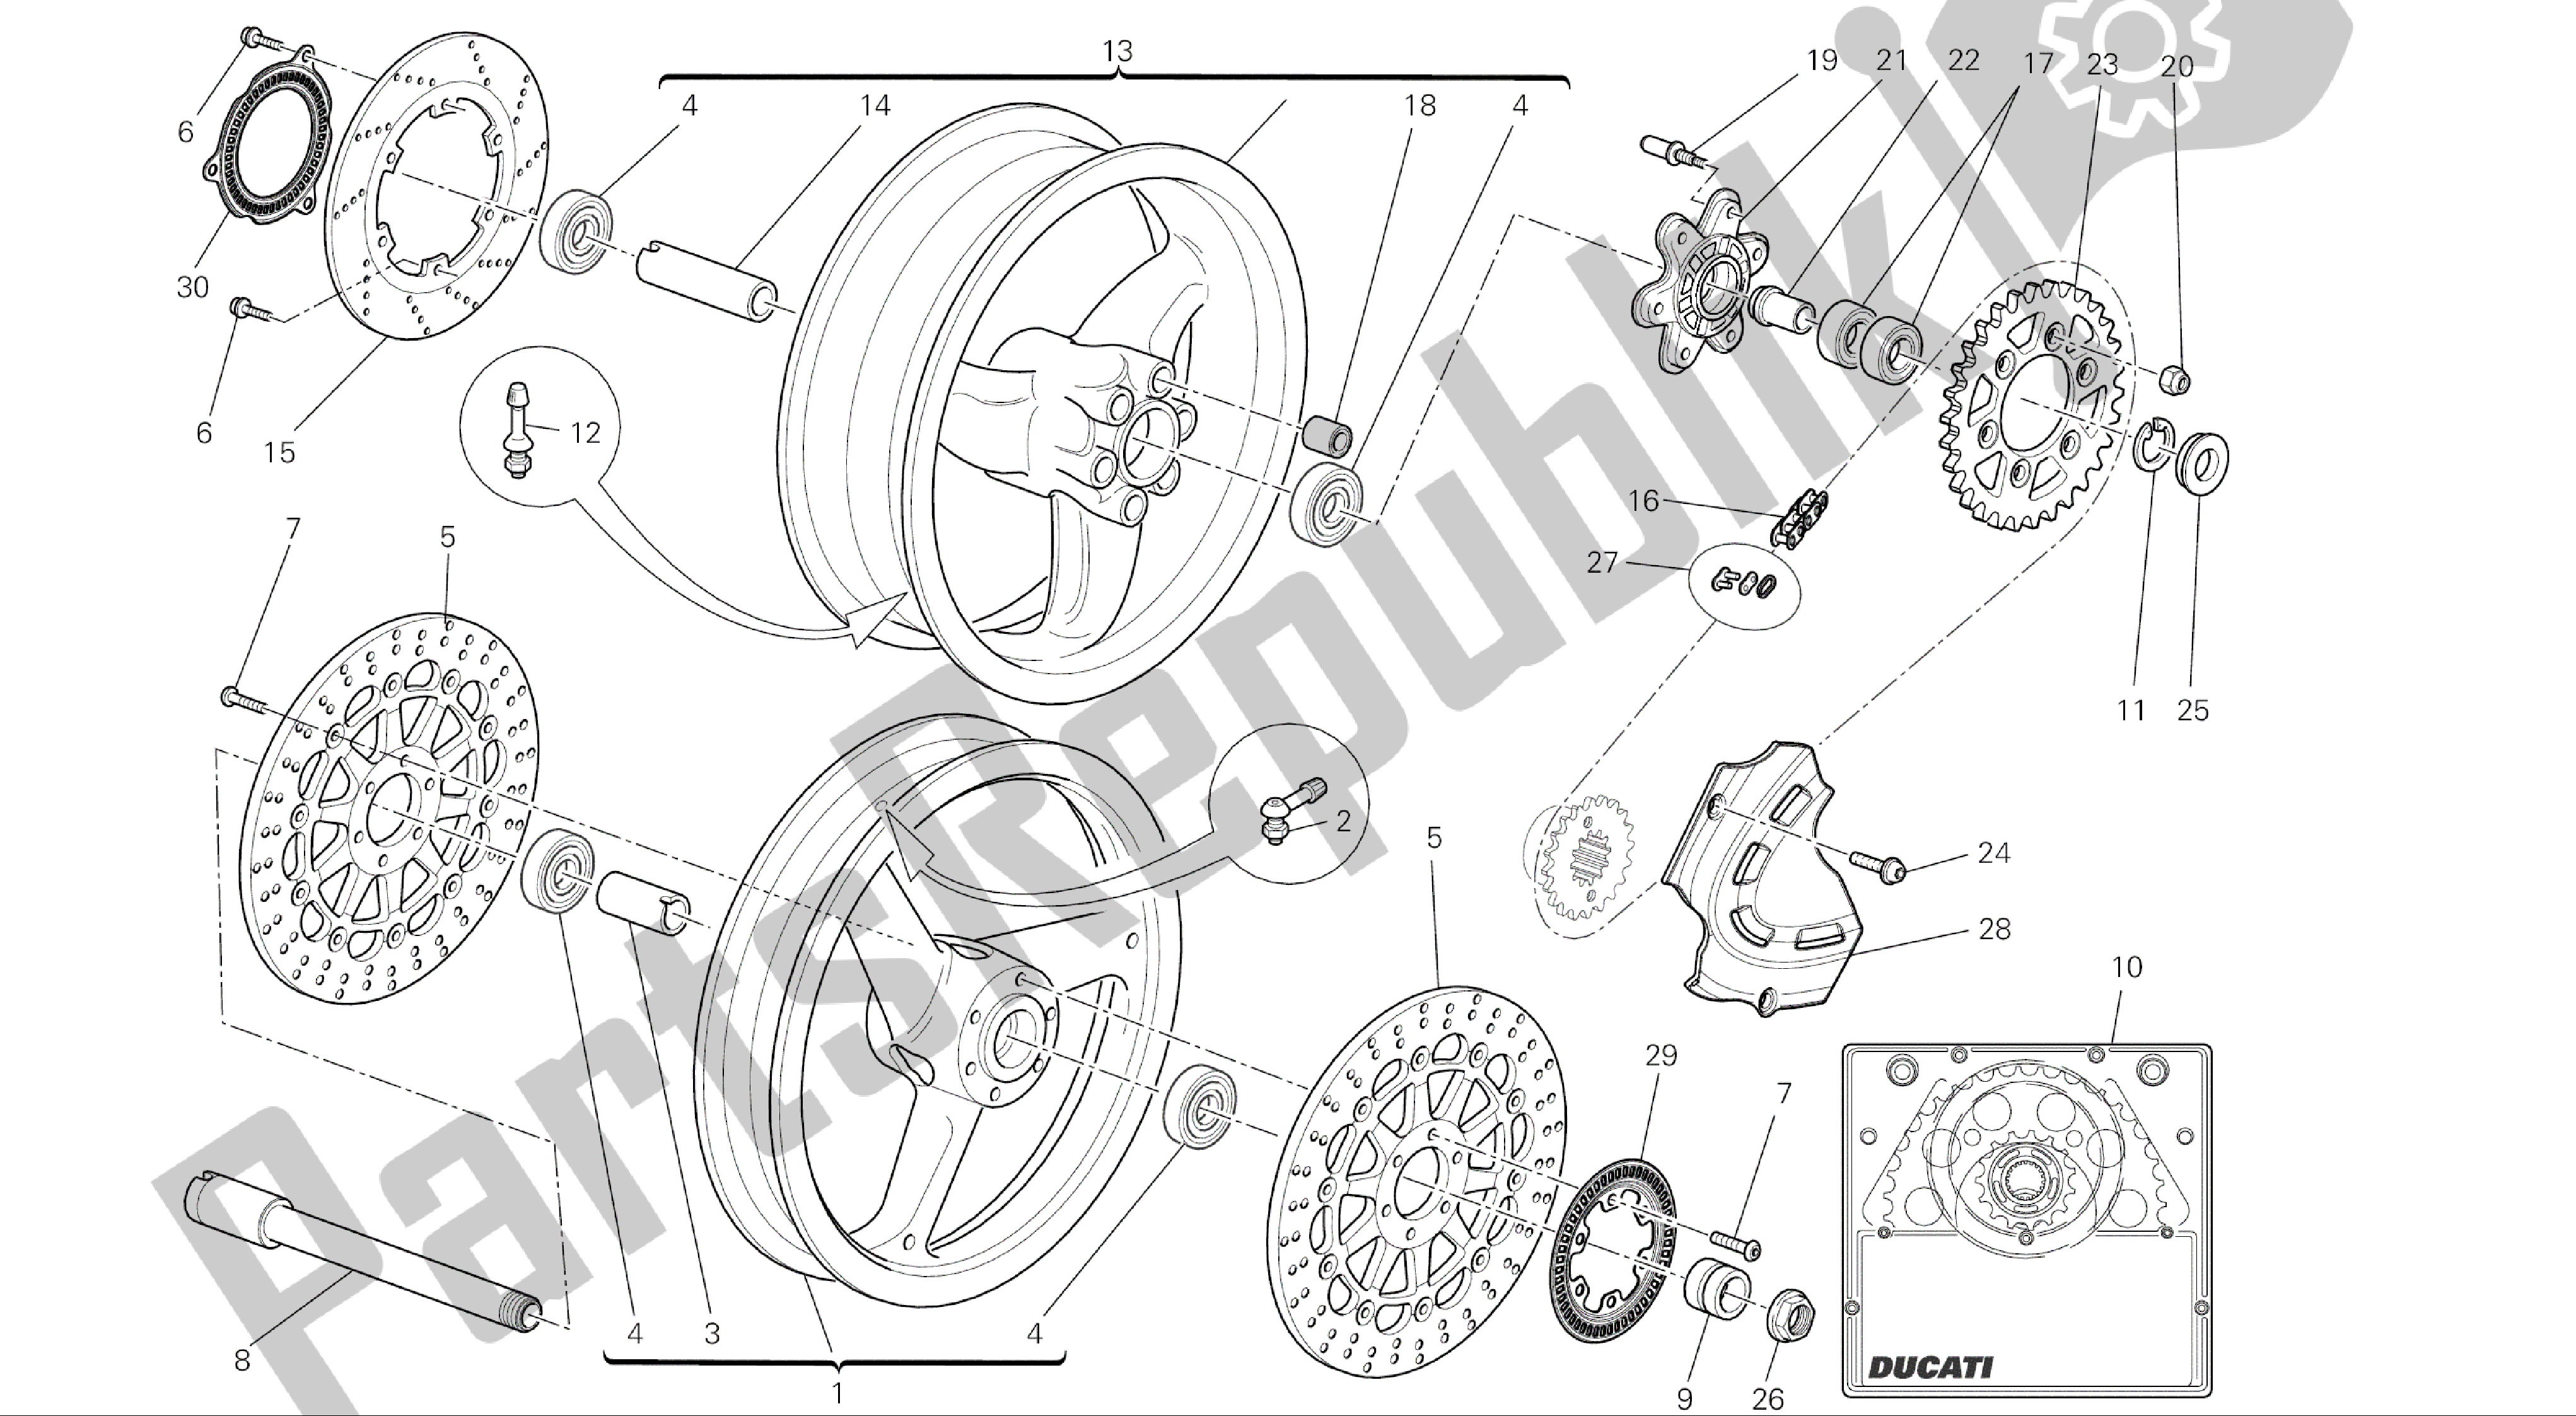 All parts for the Drawing 025 - Wheels [mod:m696 Abs,m696+abs;xst:aus,eur,jap]group Frame of the Ducati Monster ABS 696 2014